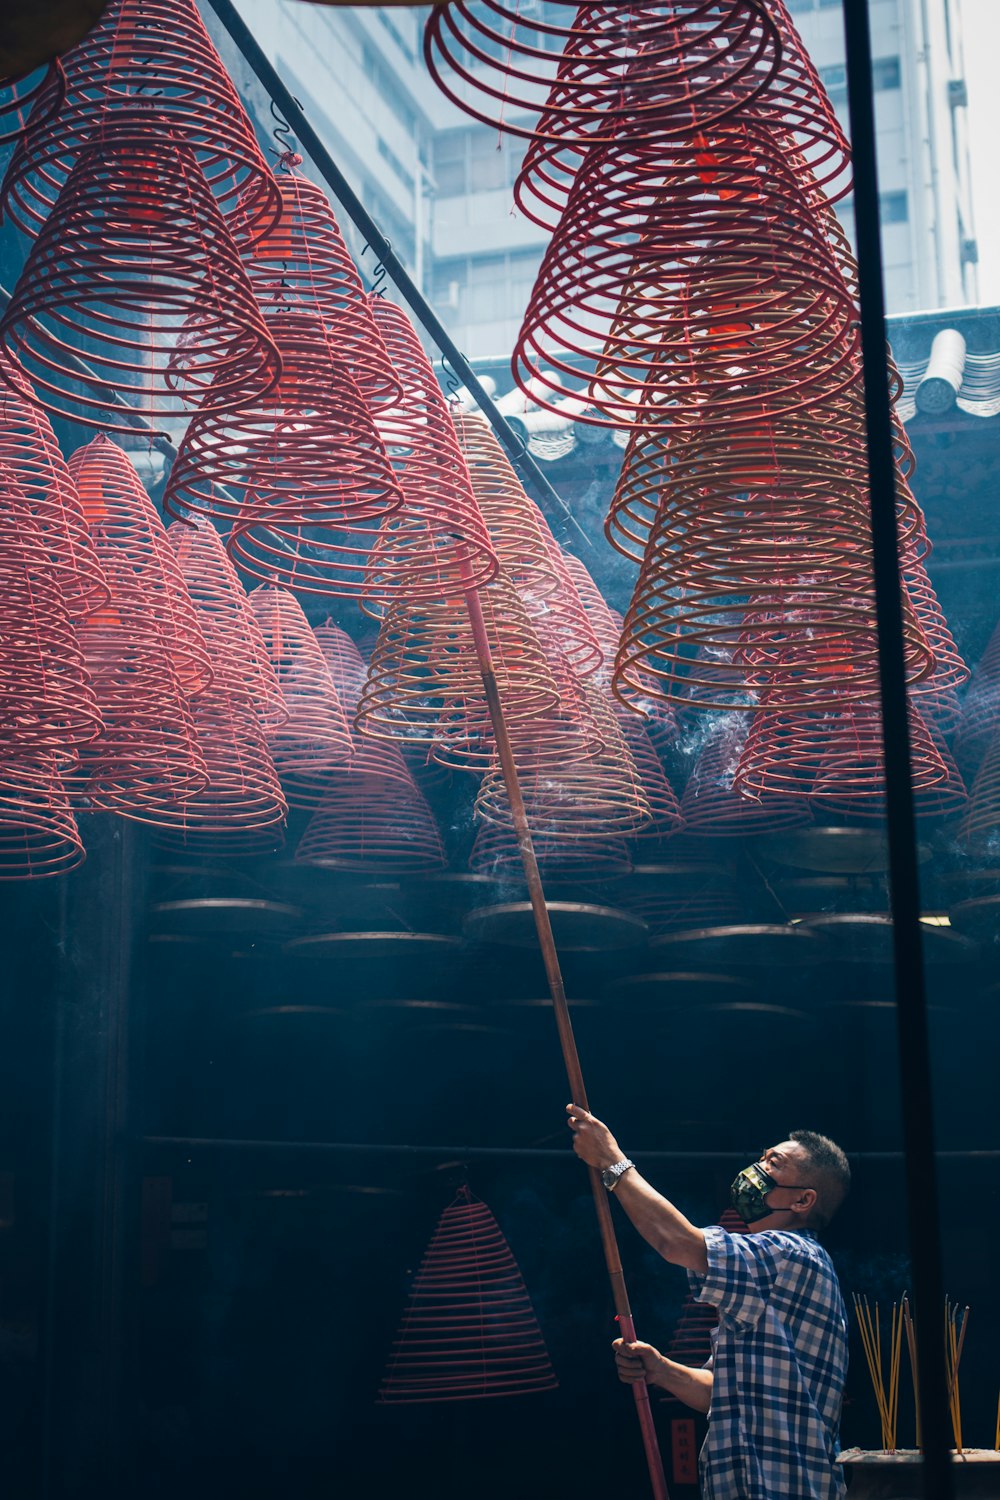 a man holding a stick in front of a bunch of red objects